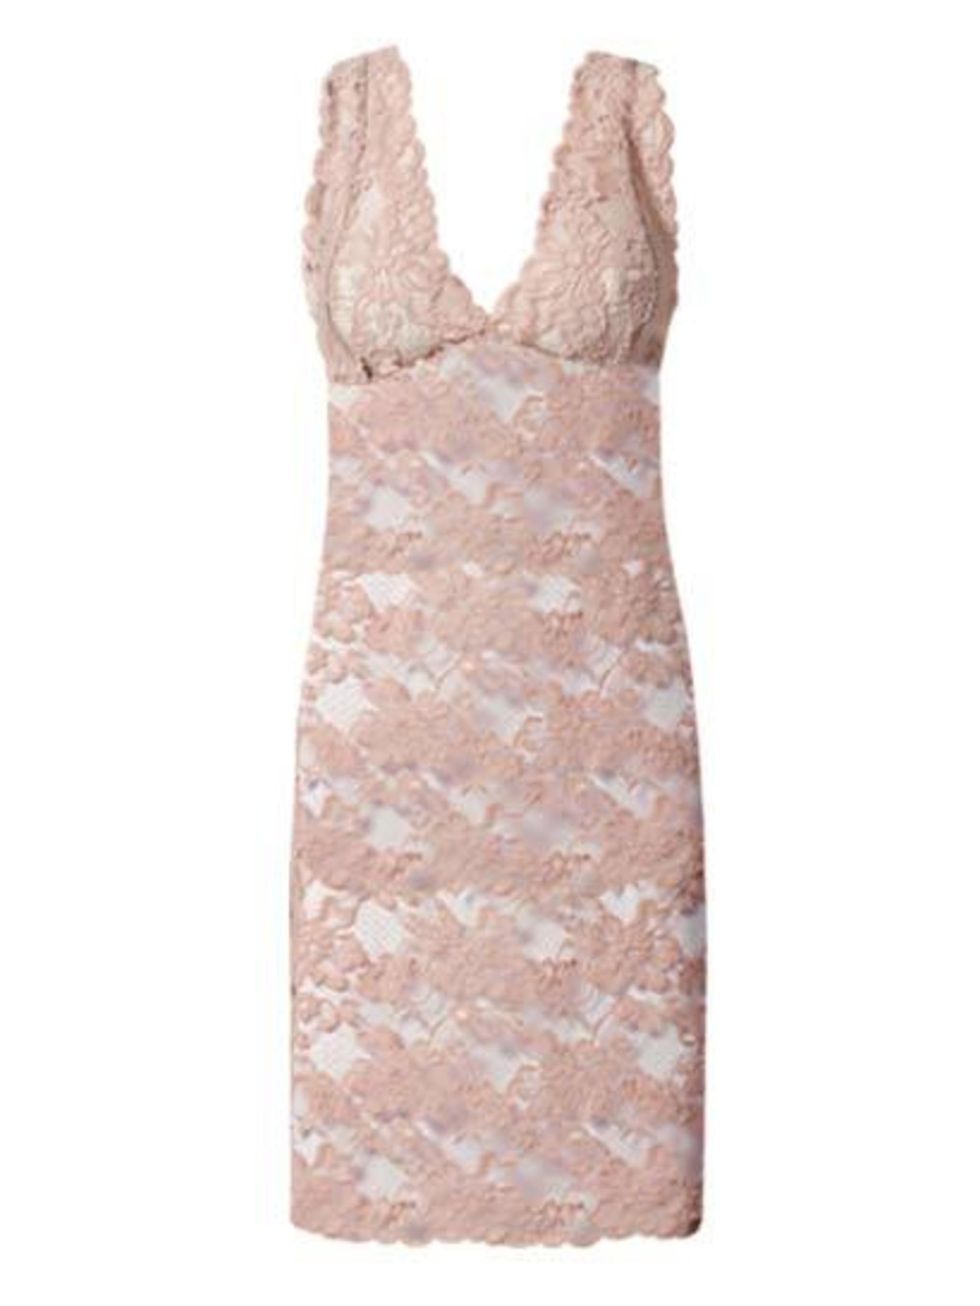 <p>Feel great in this Pink Lace Slip, £39.99 at <a href="http://uk.intimissimi.com/product/wide-shoulder-lace-slip/158298.uts?refineByCategoryId=5322">Intimissmi</a>.</p>